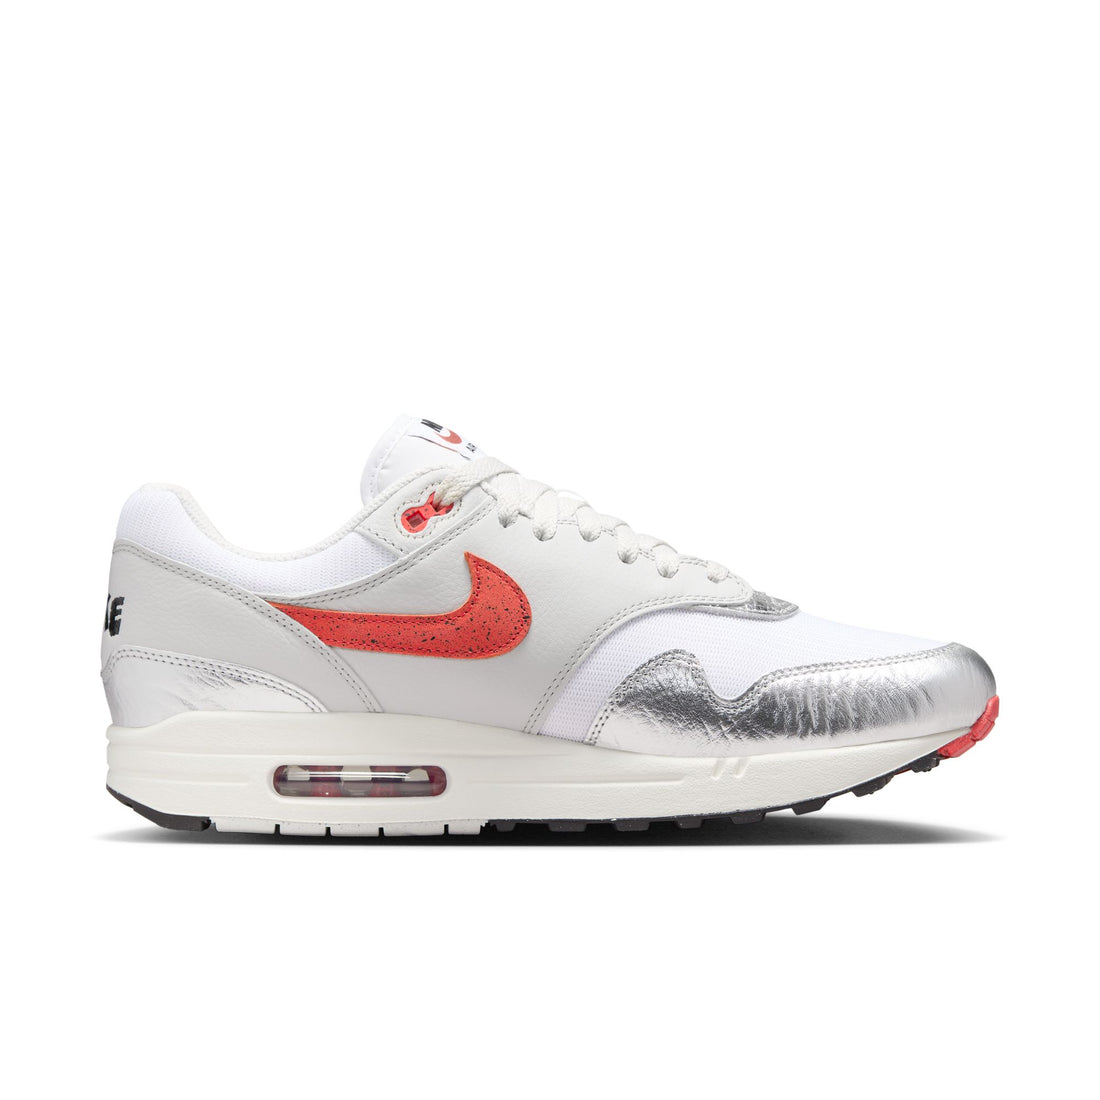 Nike Air Max 1 PRM (White/Chile Red)